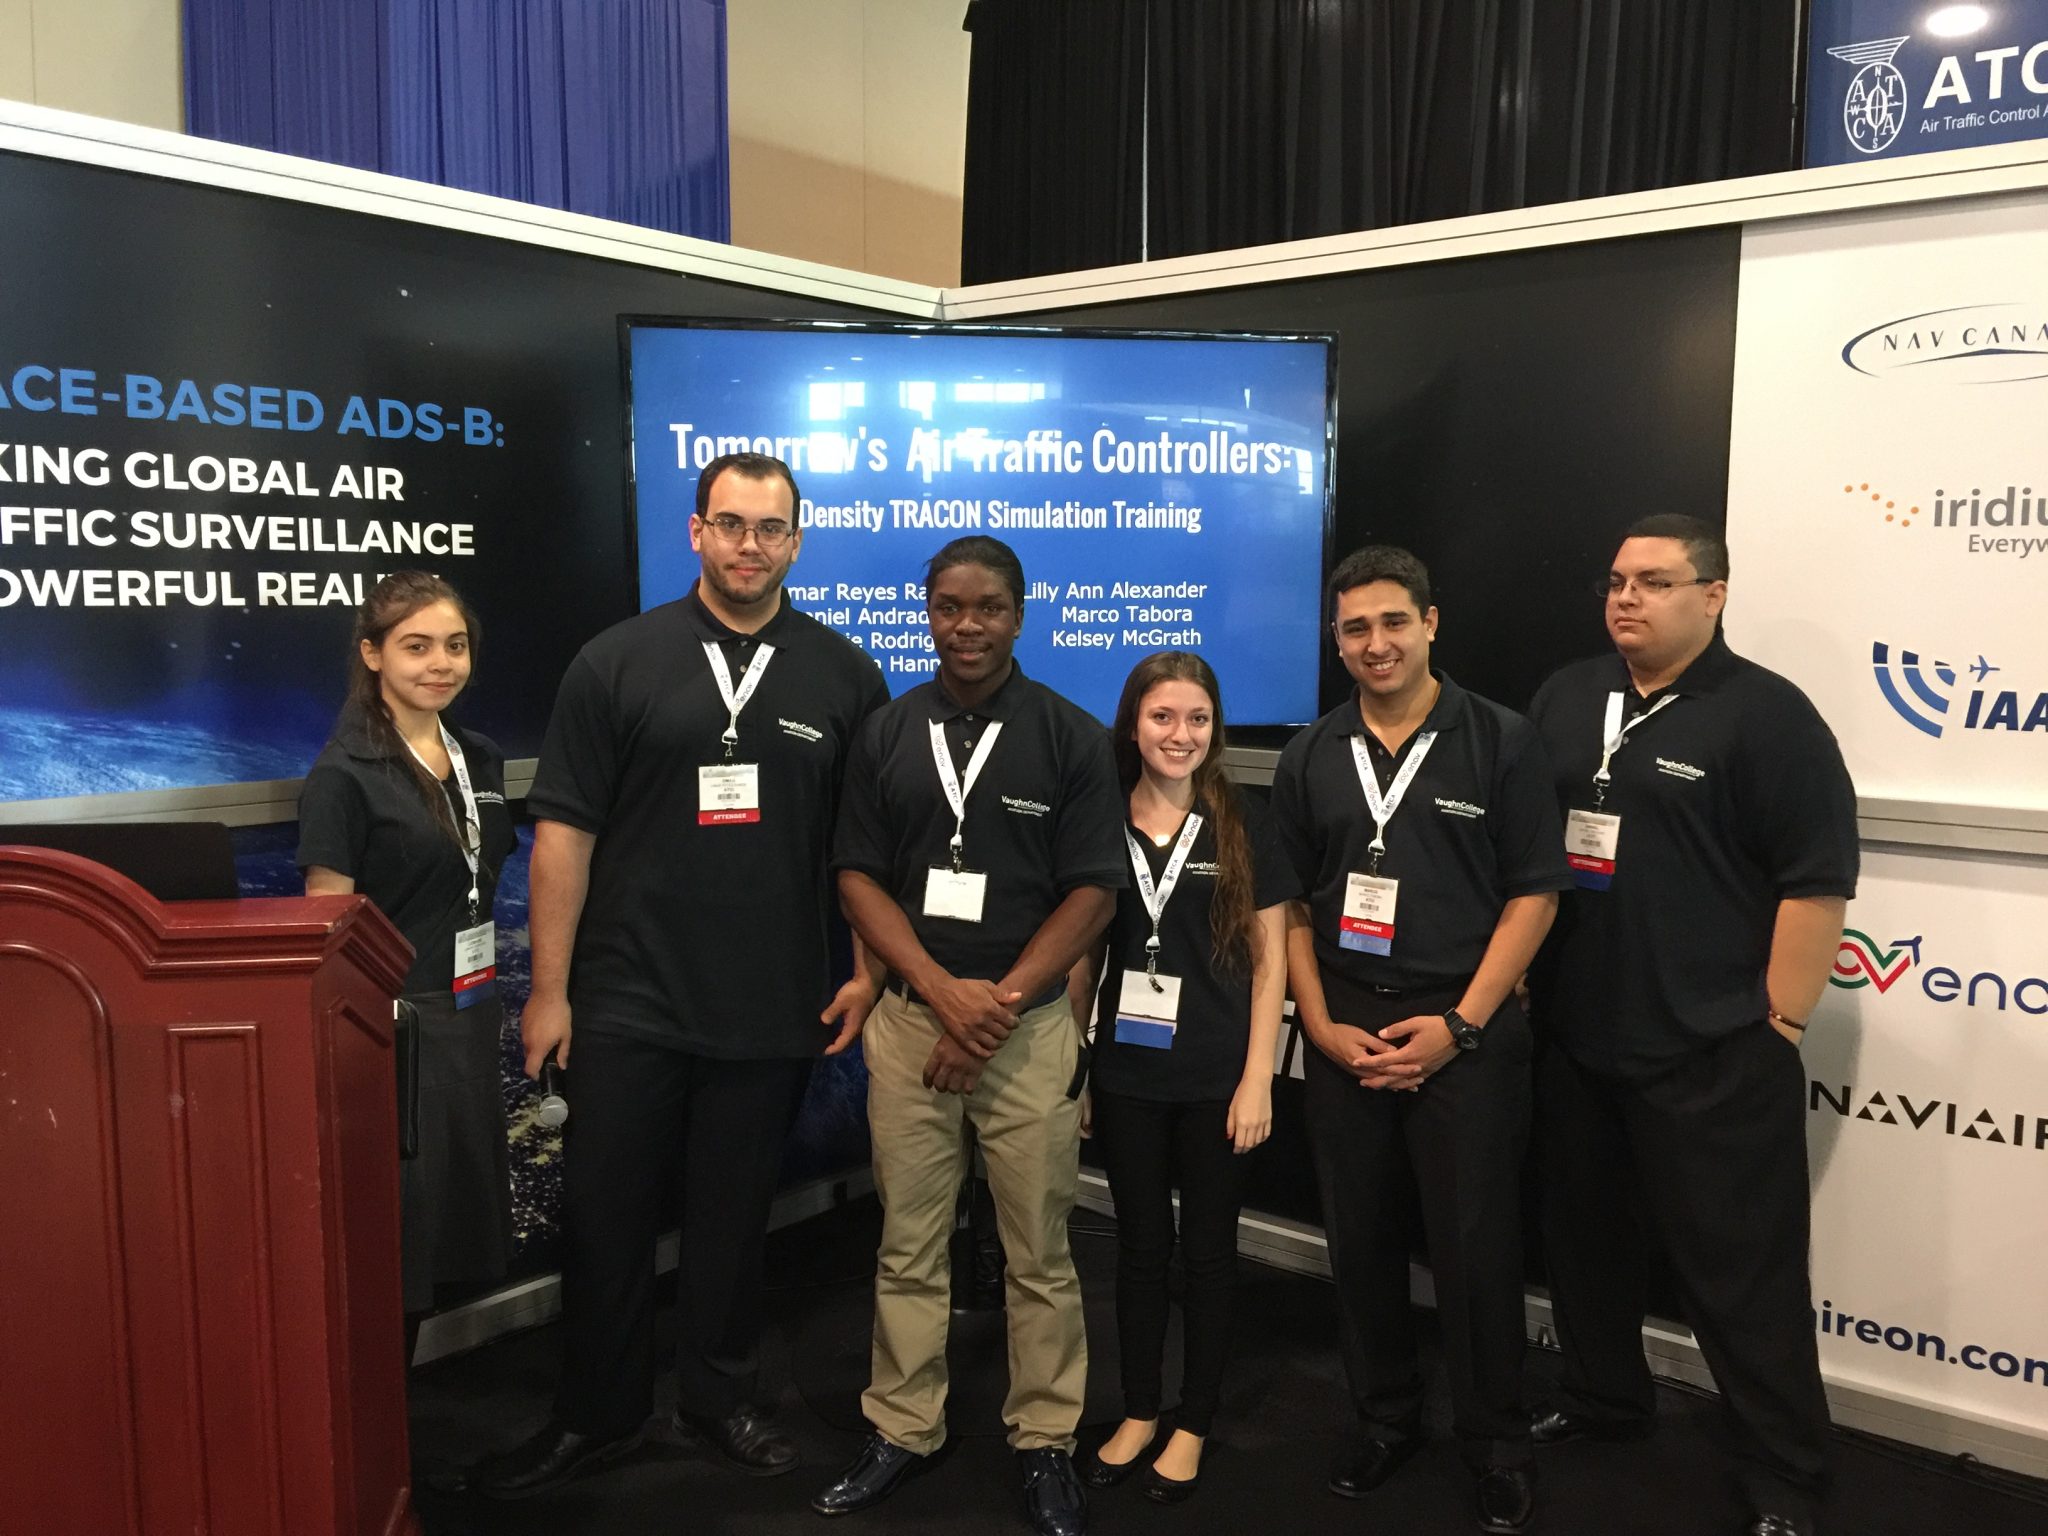 Vaughn Students Attend Air Traffic Control Association Annual Conference